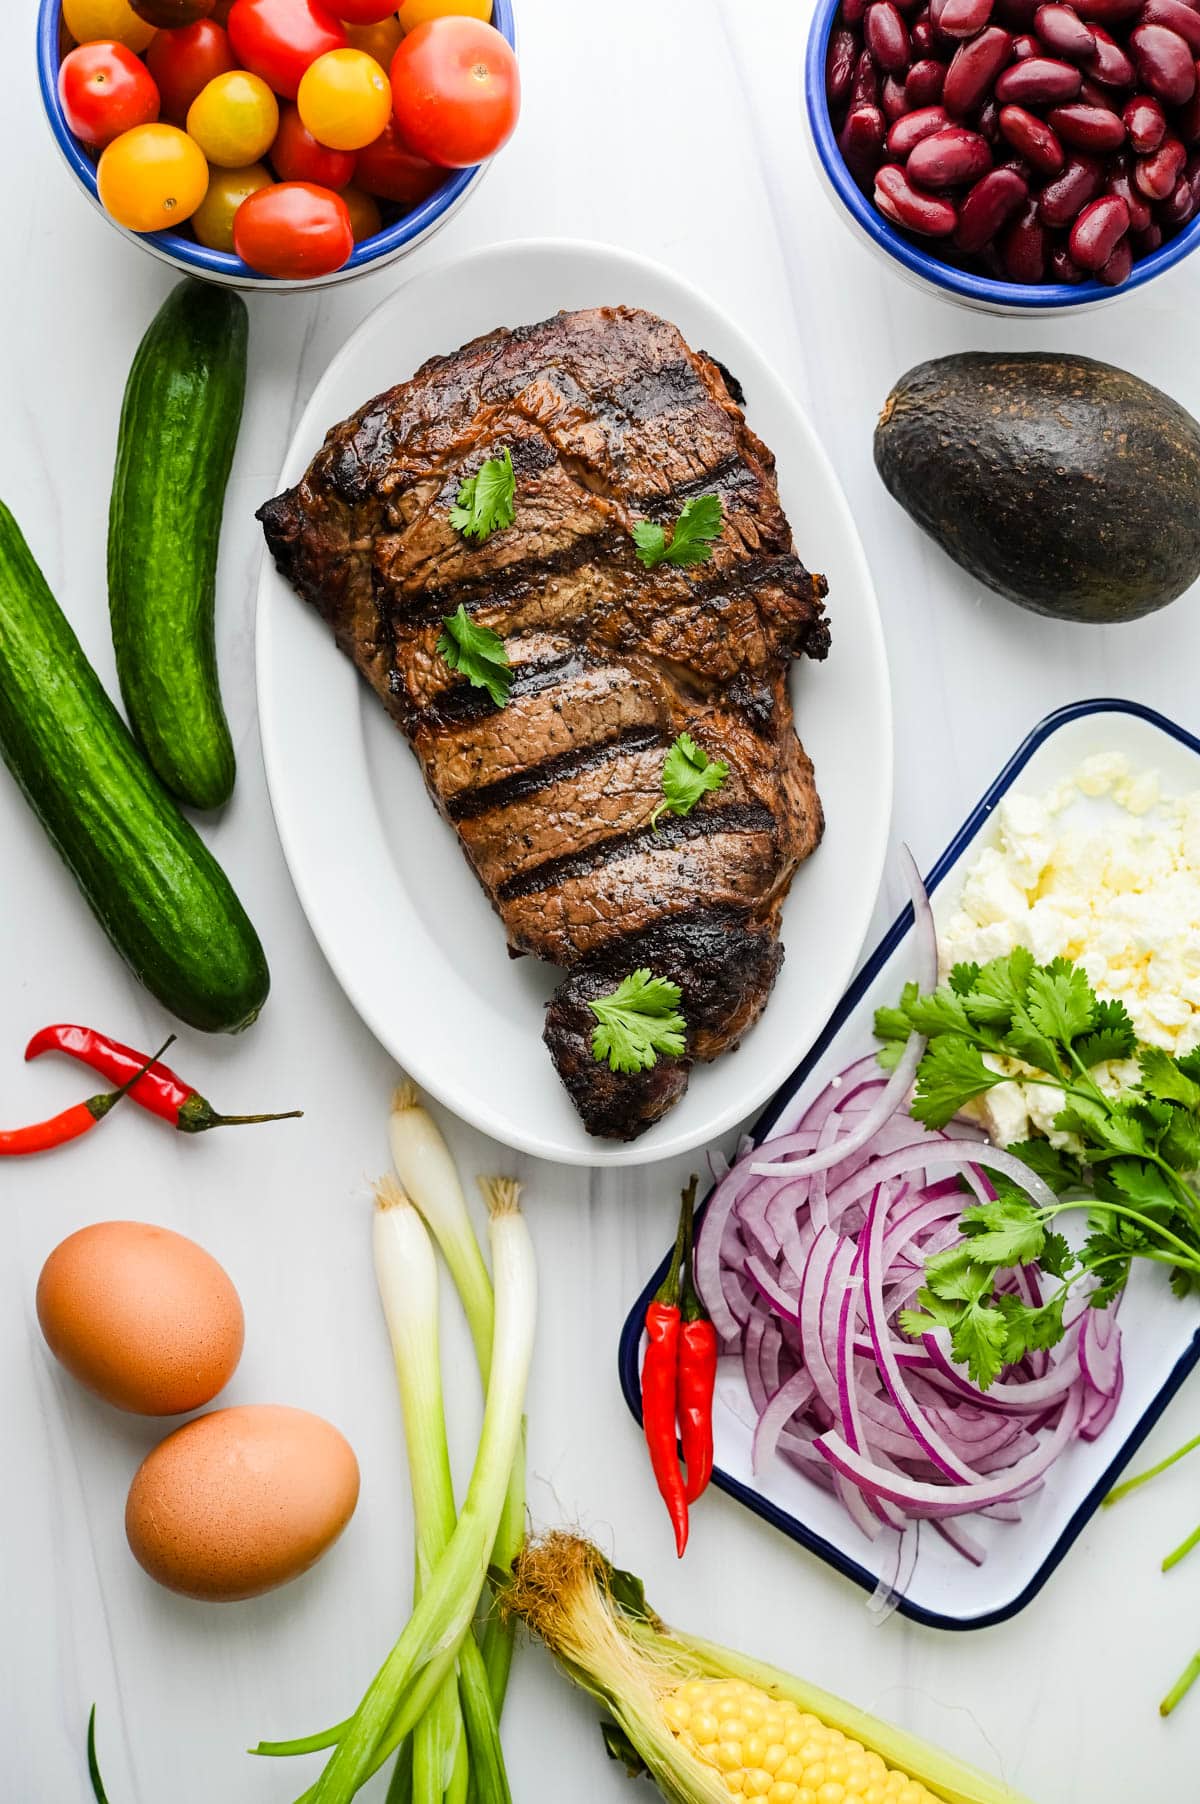 Ingredients for the steak salad include grilled ribeye, tomatoes, kidney beans, cucumber, avocado cilantro, queso fresco, green onions, chilies and jammy eggs.